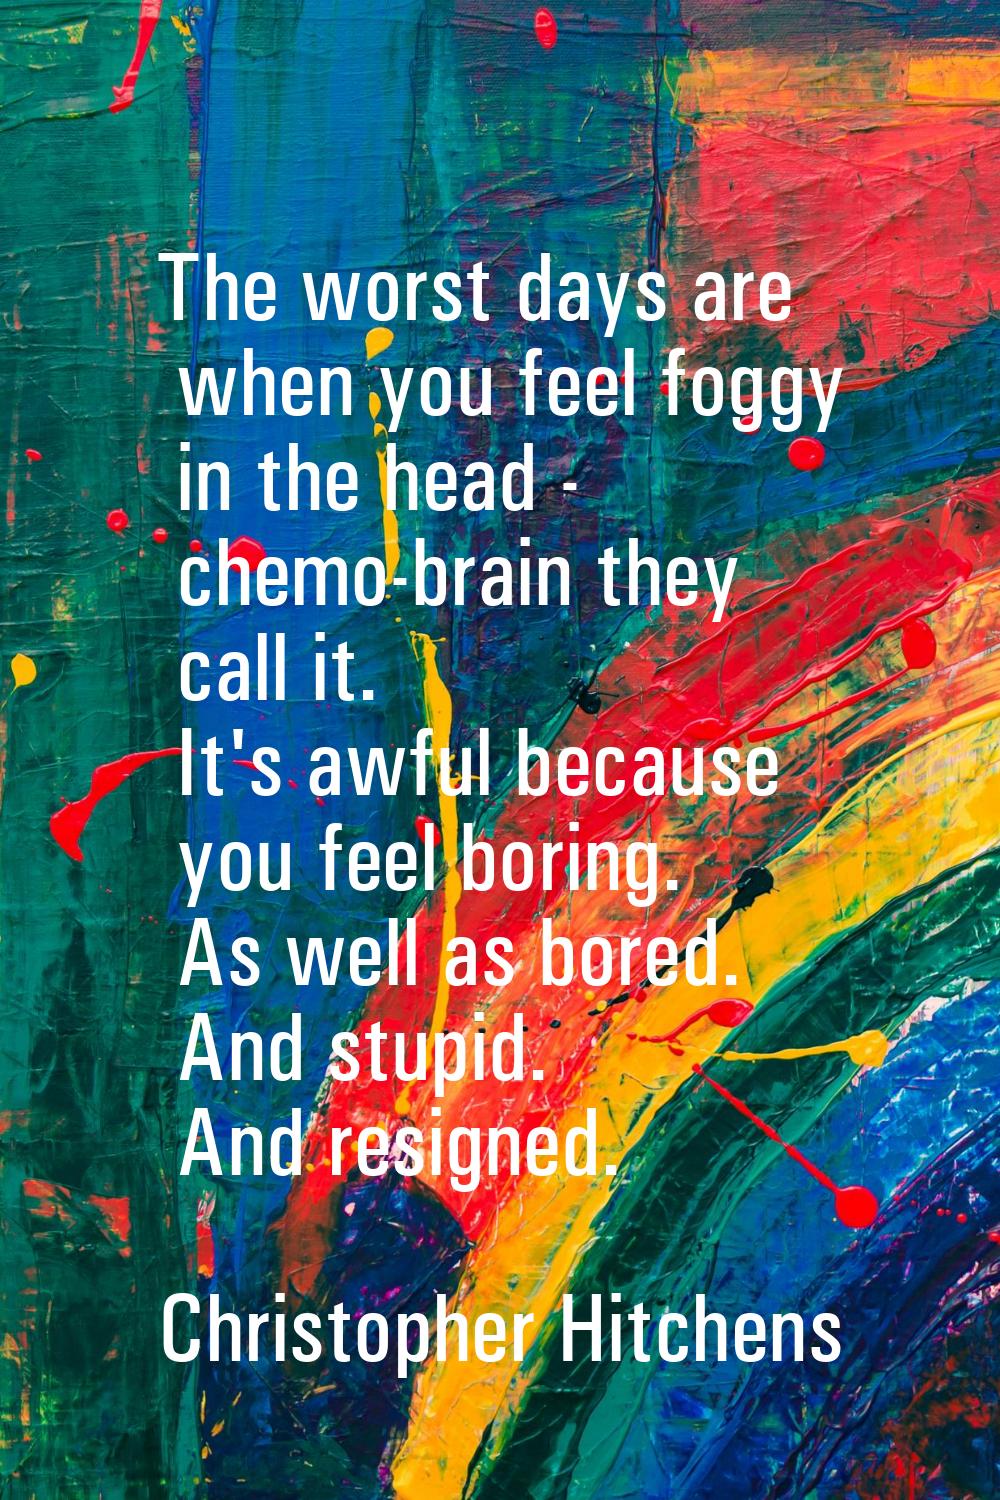 The worst days are when you feel foggy in the head - chemo-brain they call it. It's awful because y